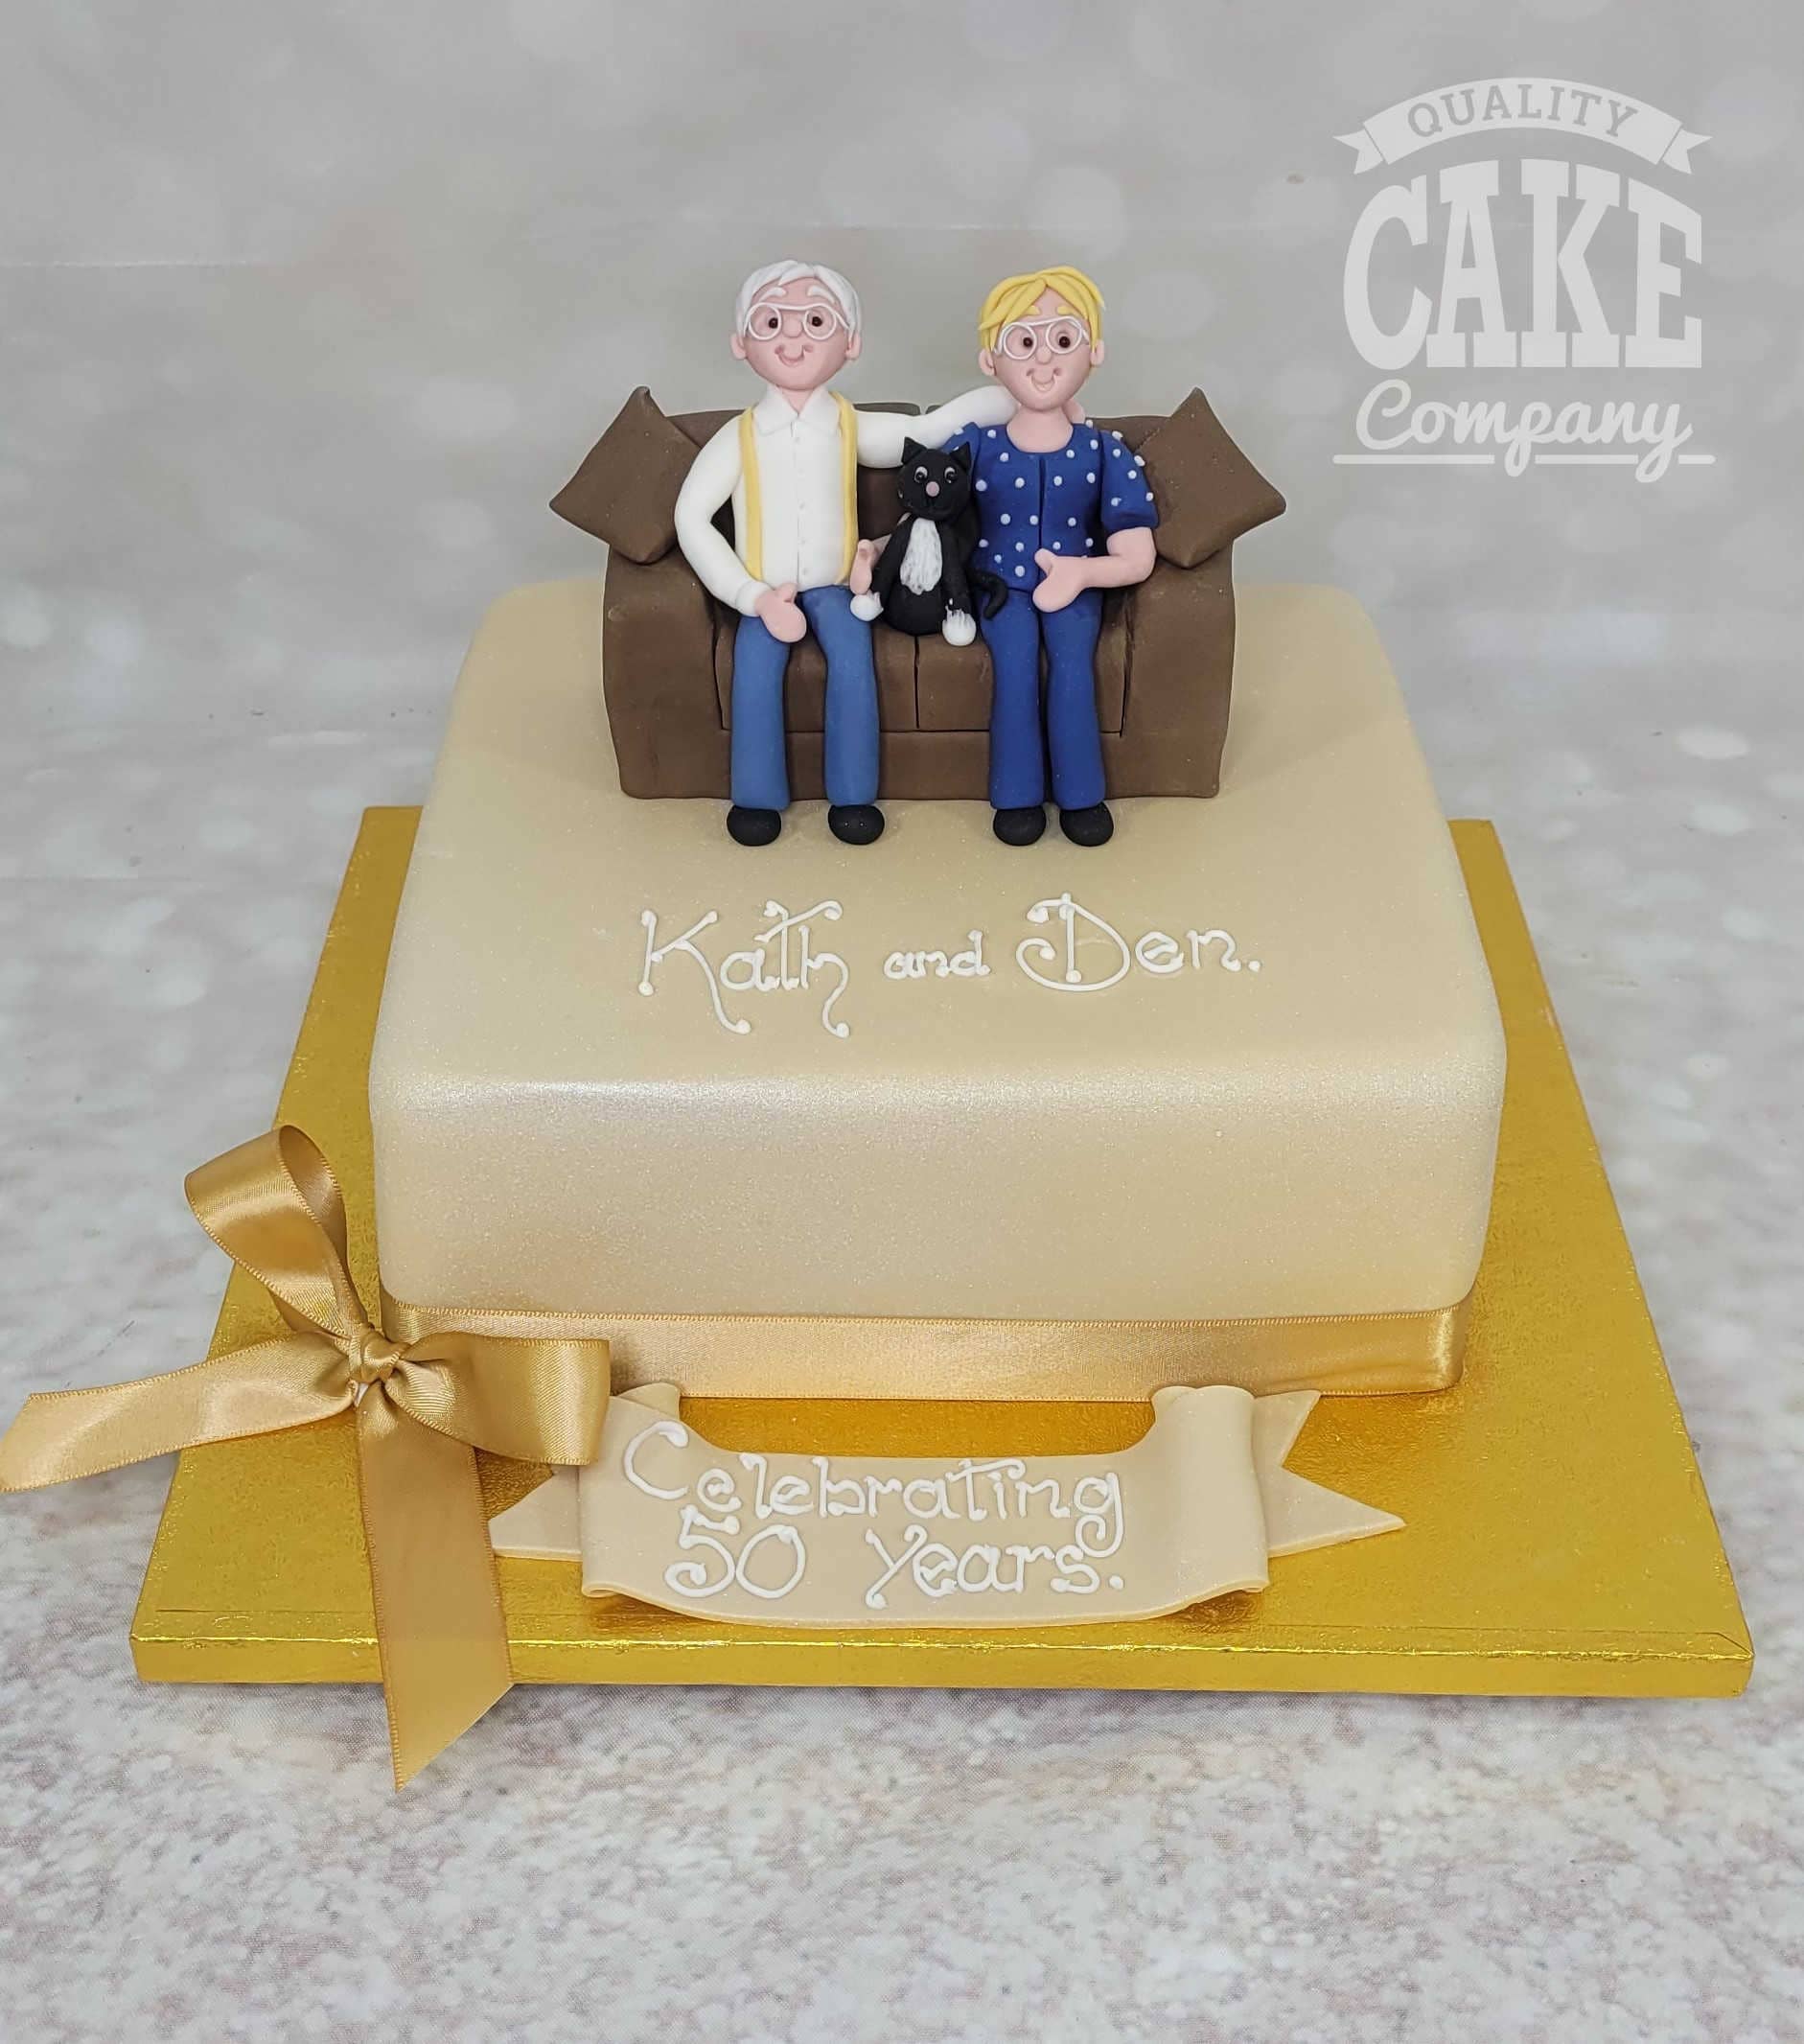 Anniversary Cake With Photo For Couples | Happy anniversary cakes, Happy  marriage anniversary cake, Anniversary cake with photo